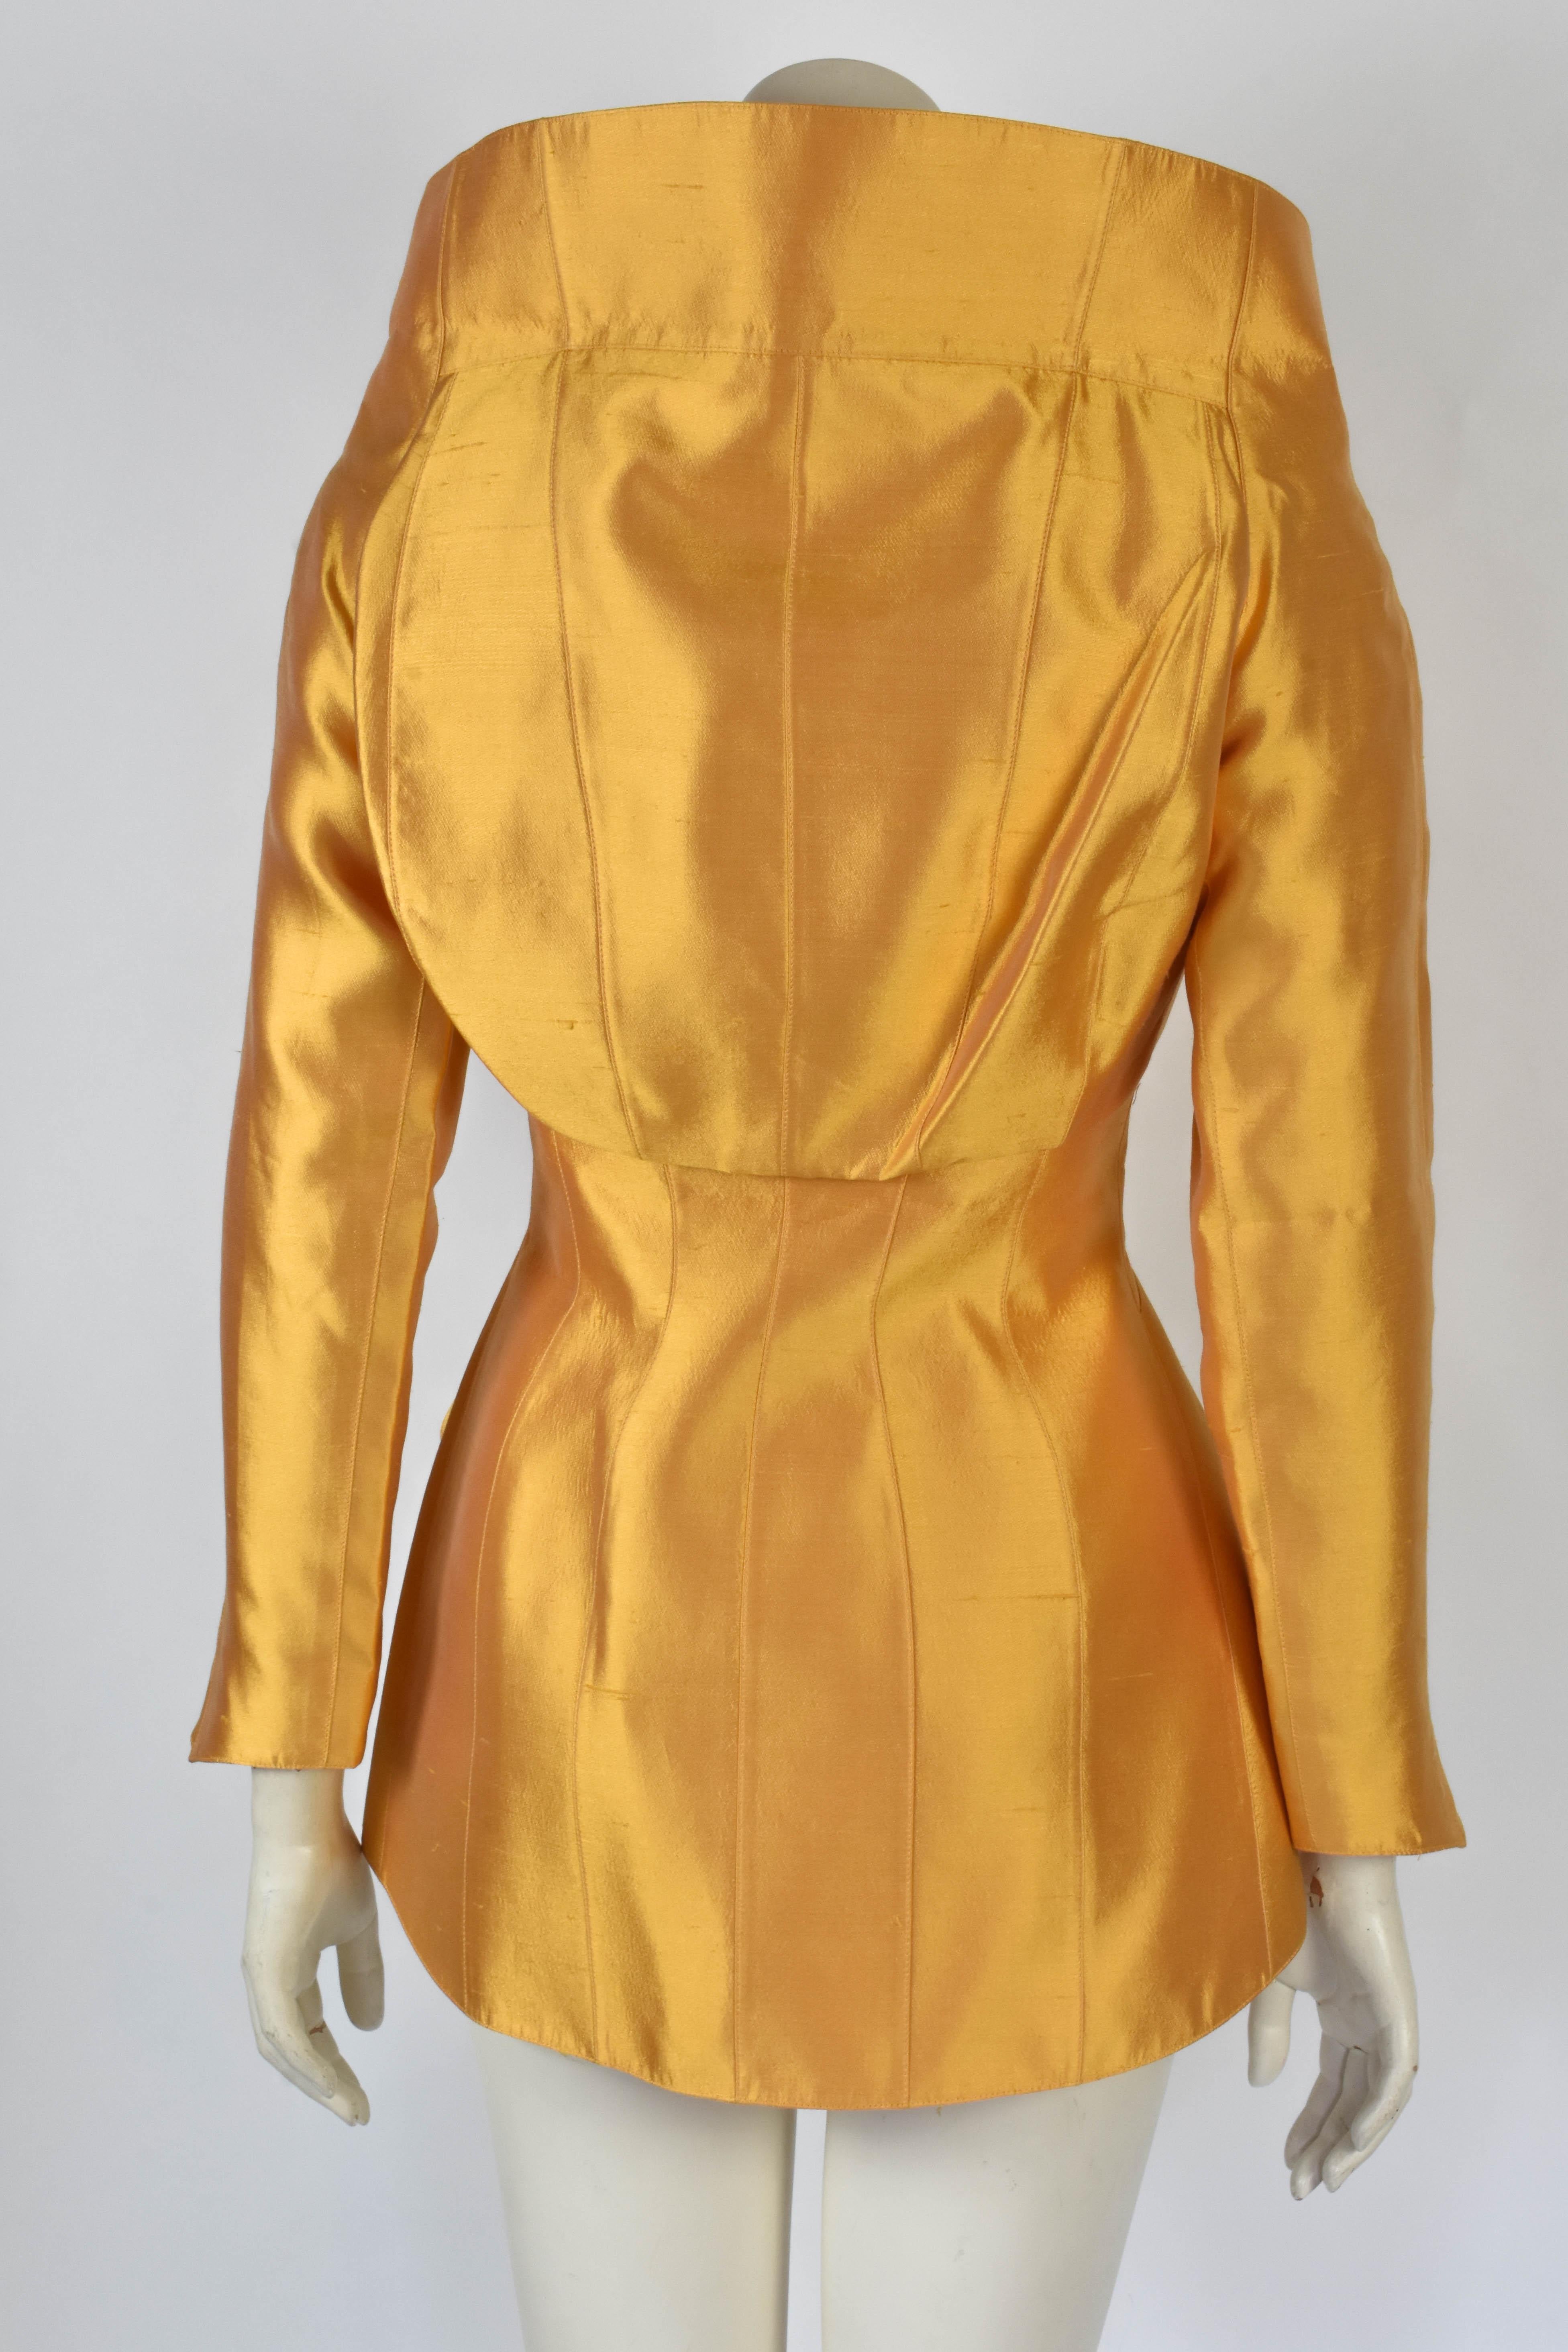 Women's Thierry Mugler Haute Couture 1995 Cirque d'Hiver Gold Jacket worn By Kate Moss